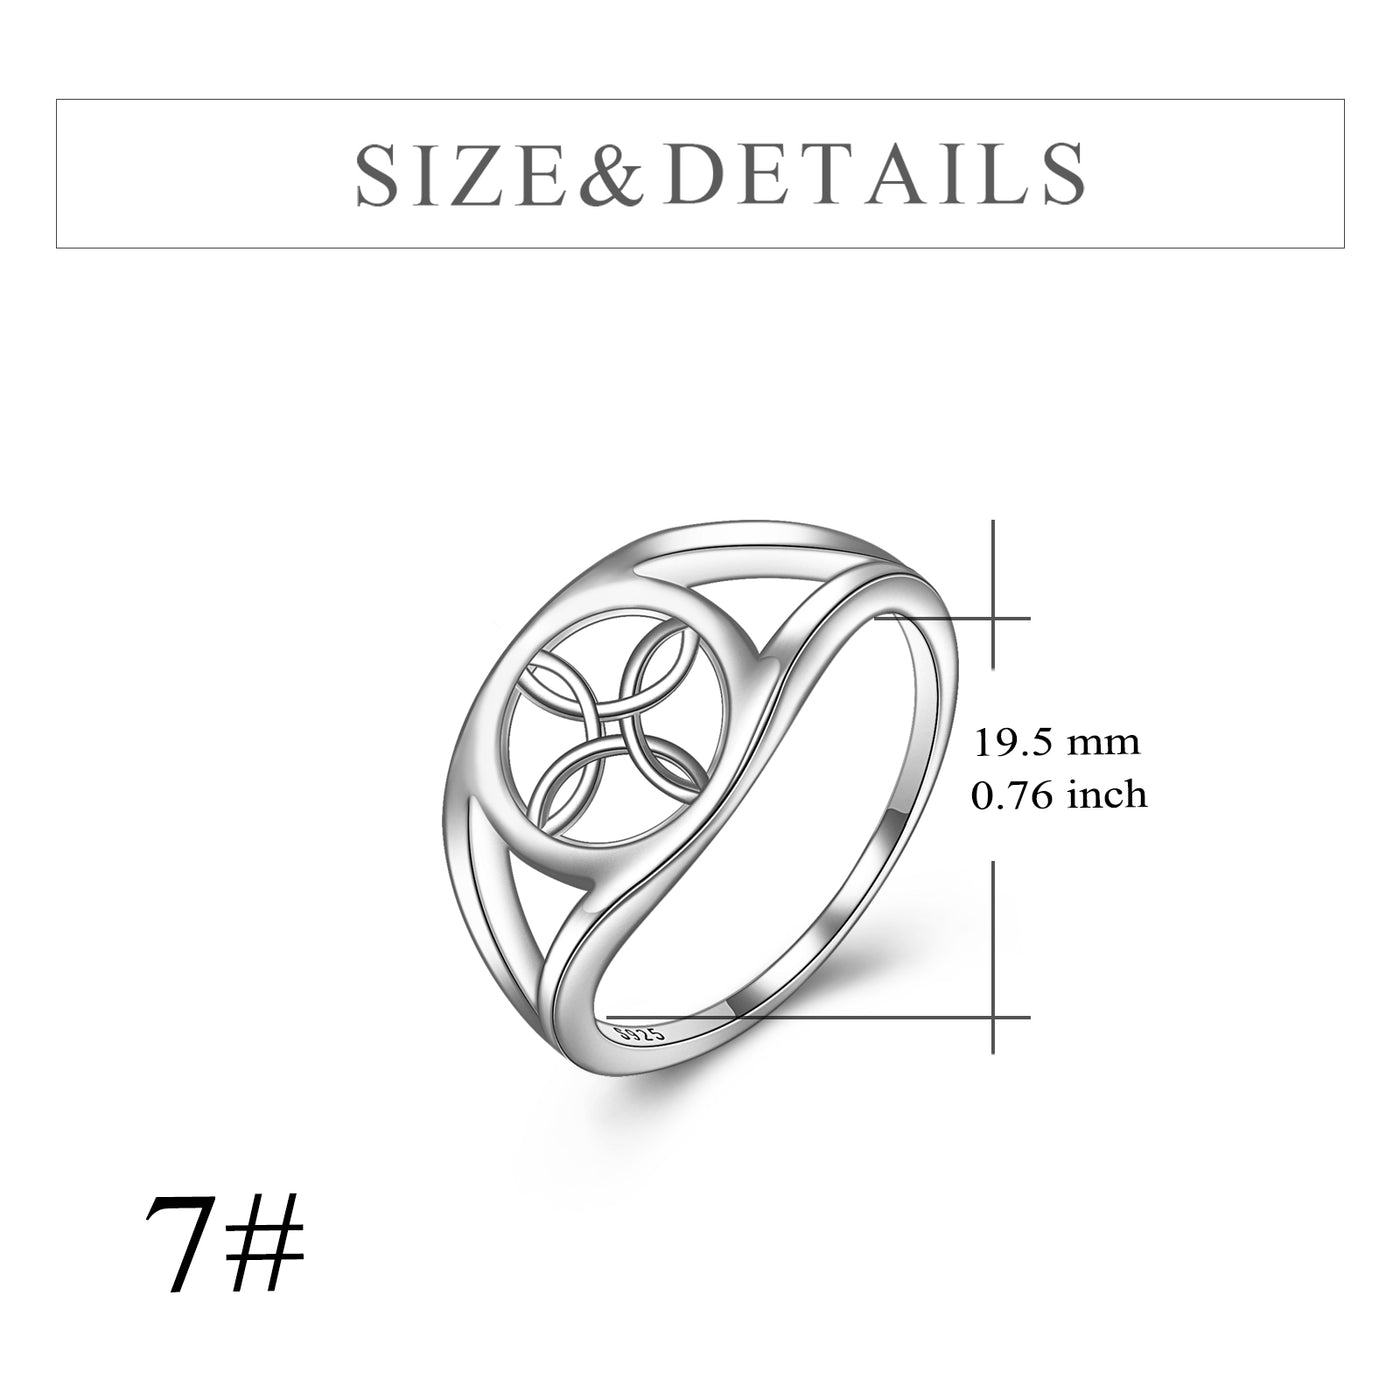 Sterling Sliver Celtic Circle Round Knot Rings